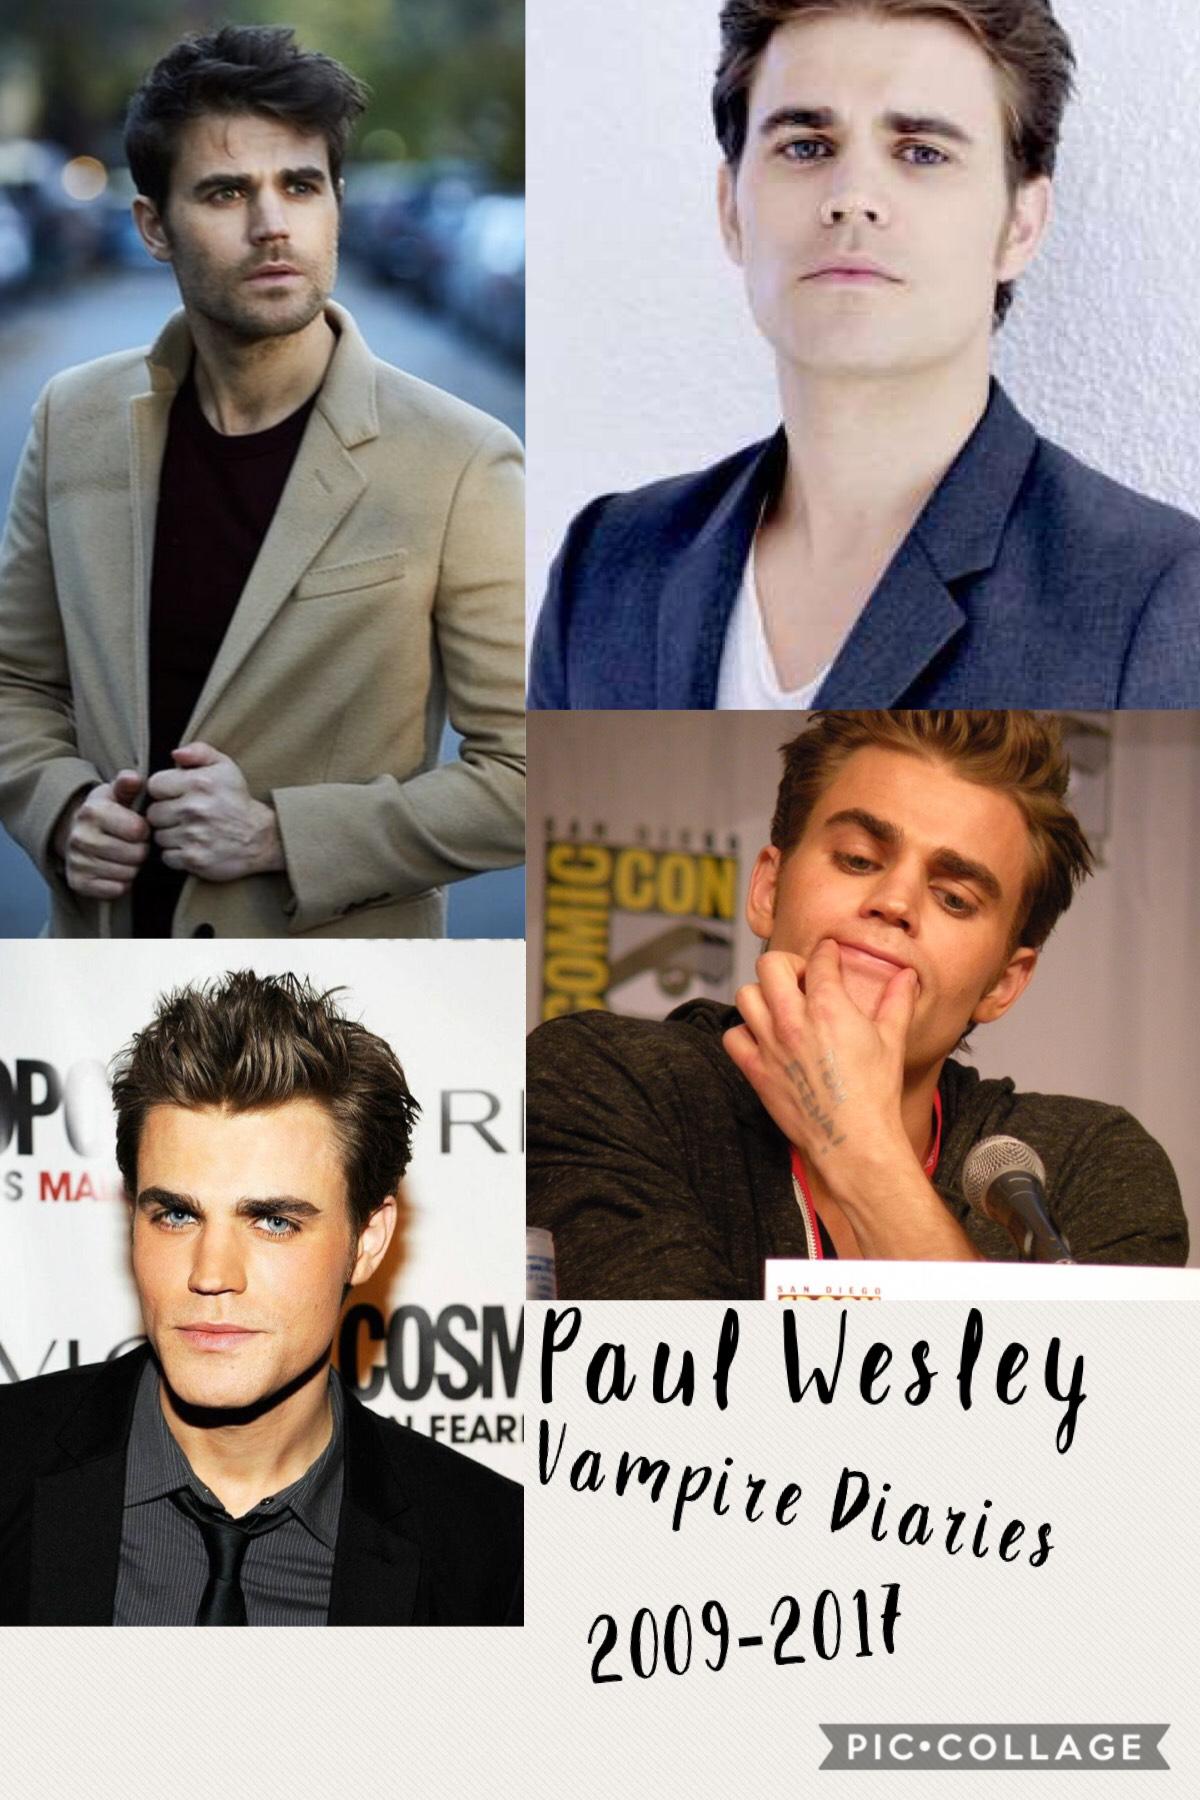 I’m watching this show now! It is so good!!! Paul Wesley is so cute!! He is my celebrity crush!!♥️♥️